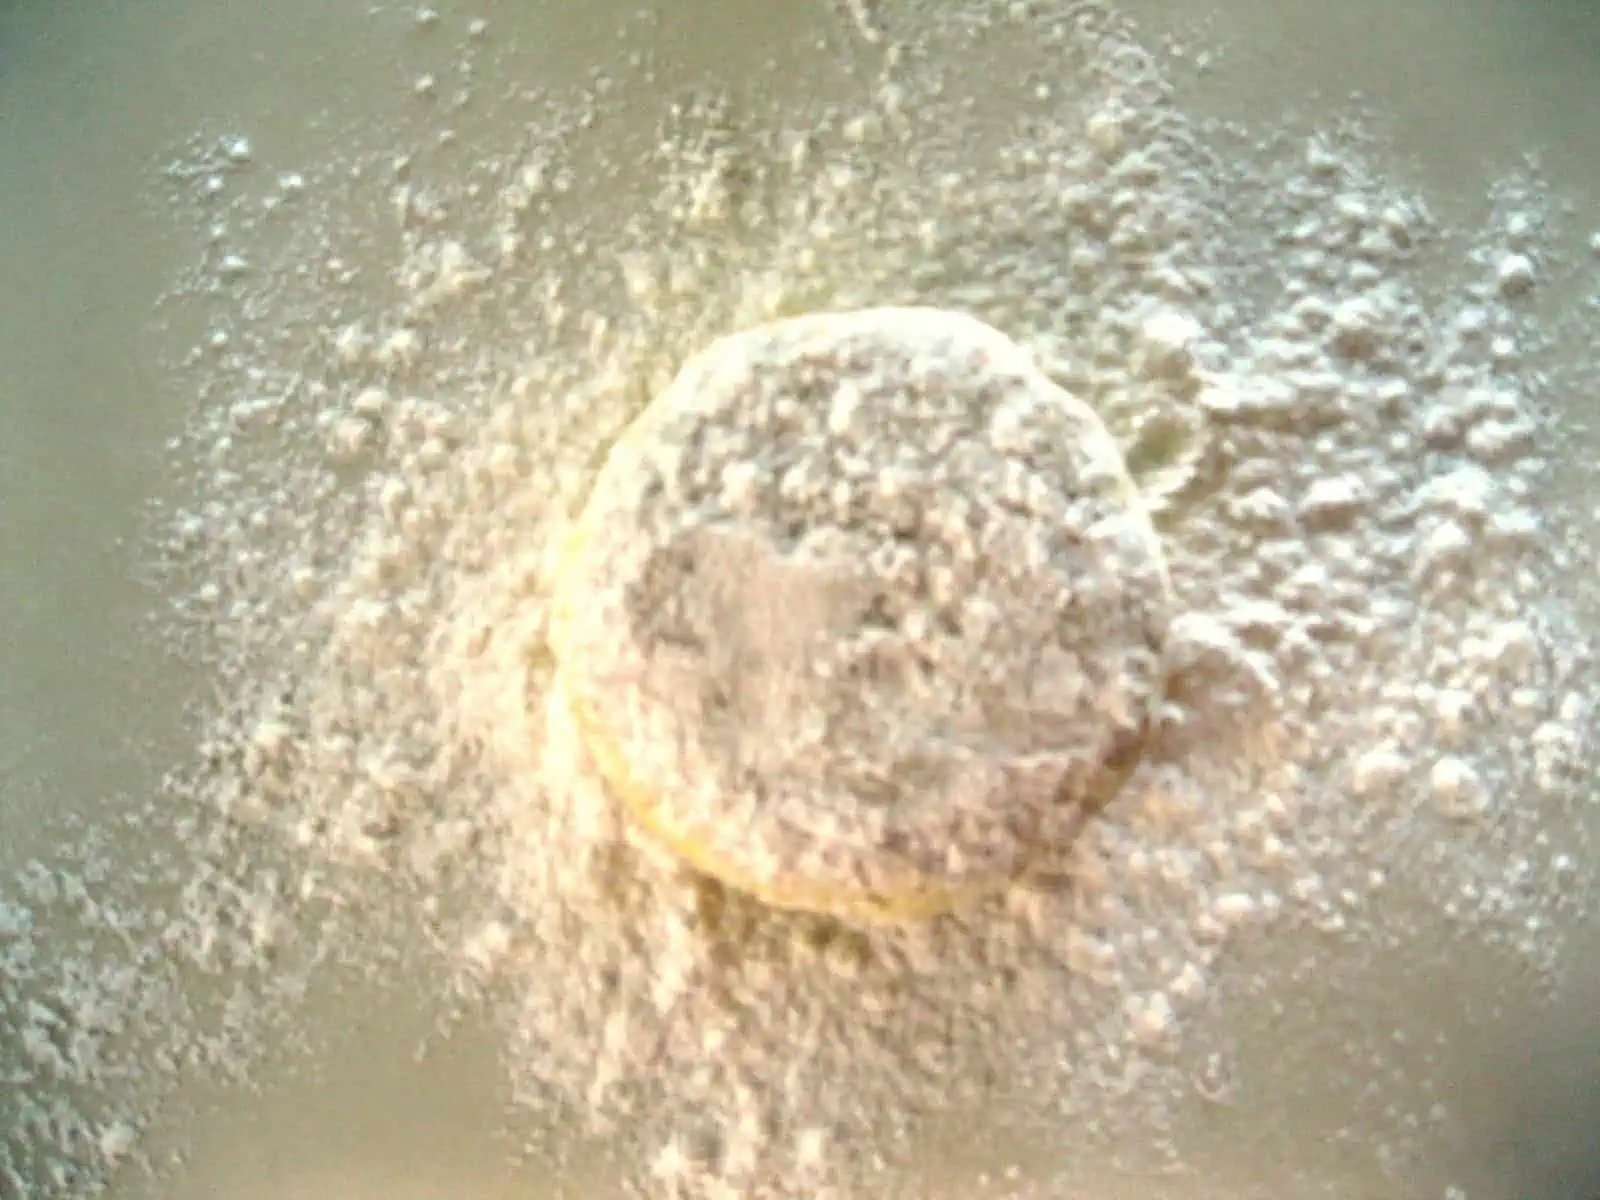 A round of pie crust dough covered in flour on the counter.